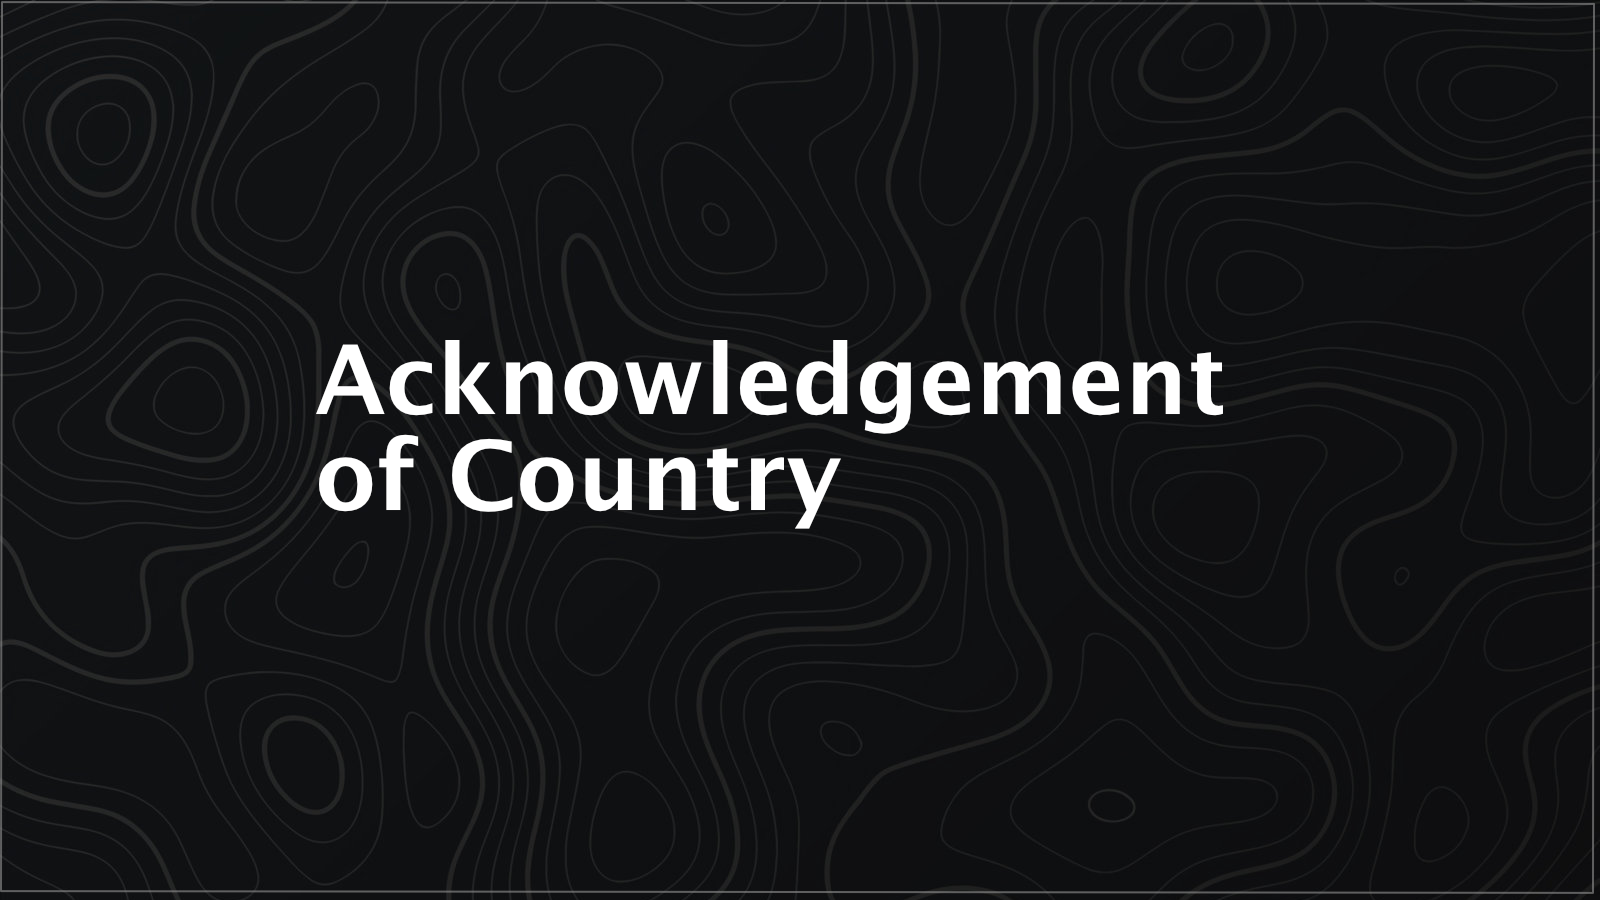 Why do we have an Acknowledgement of Country